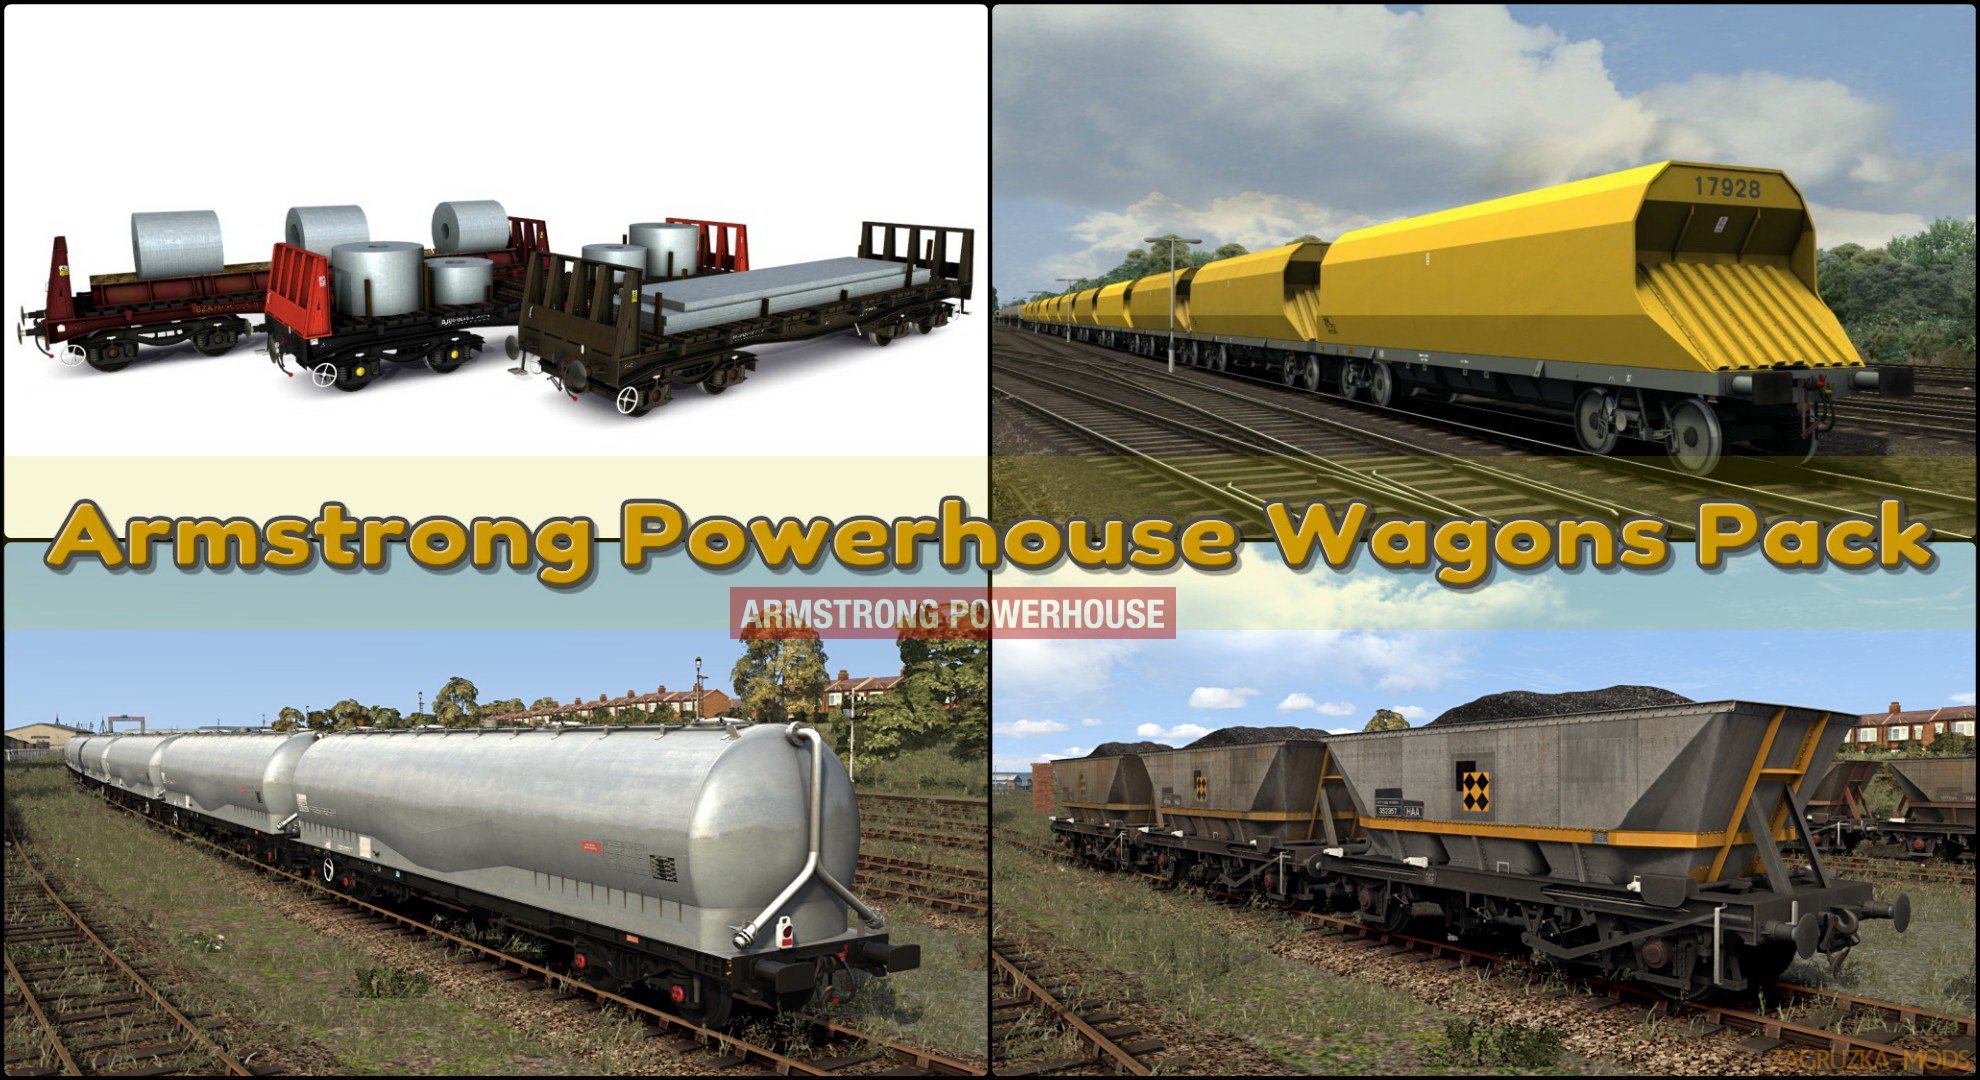 Armstrong Powerhouse Wagons Pack v1.0 for TS 2018